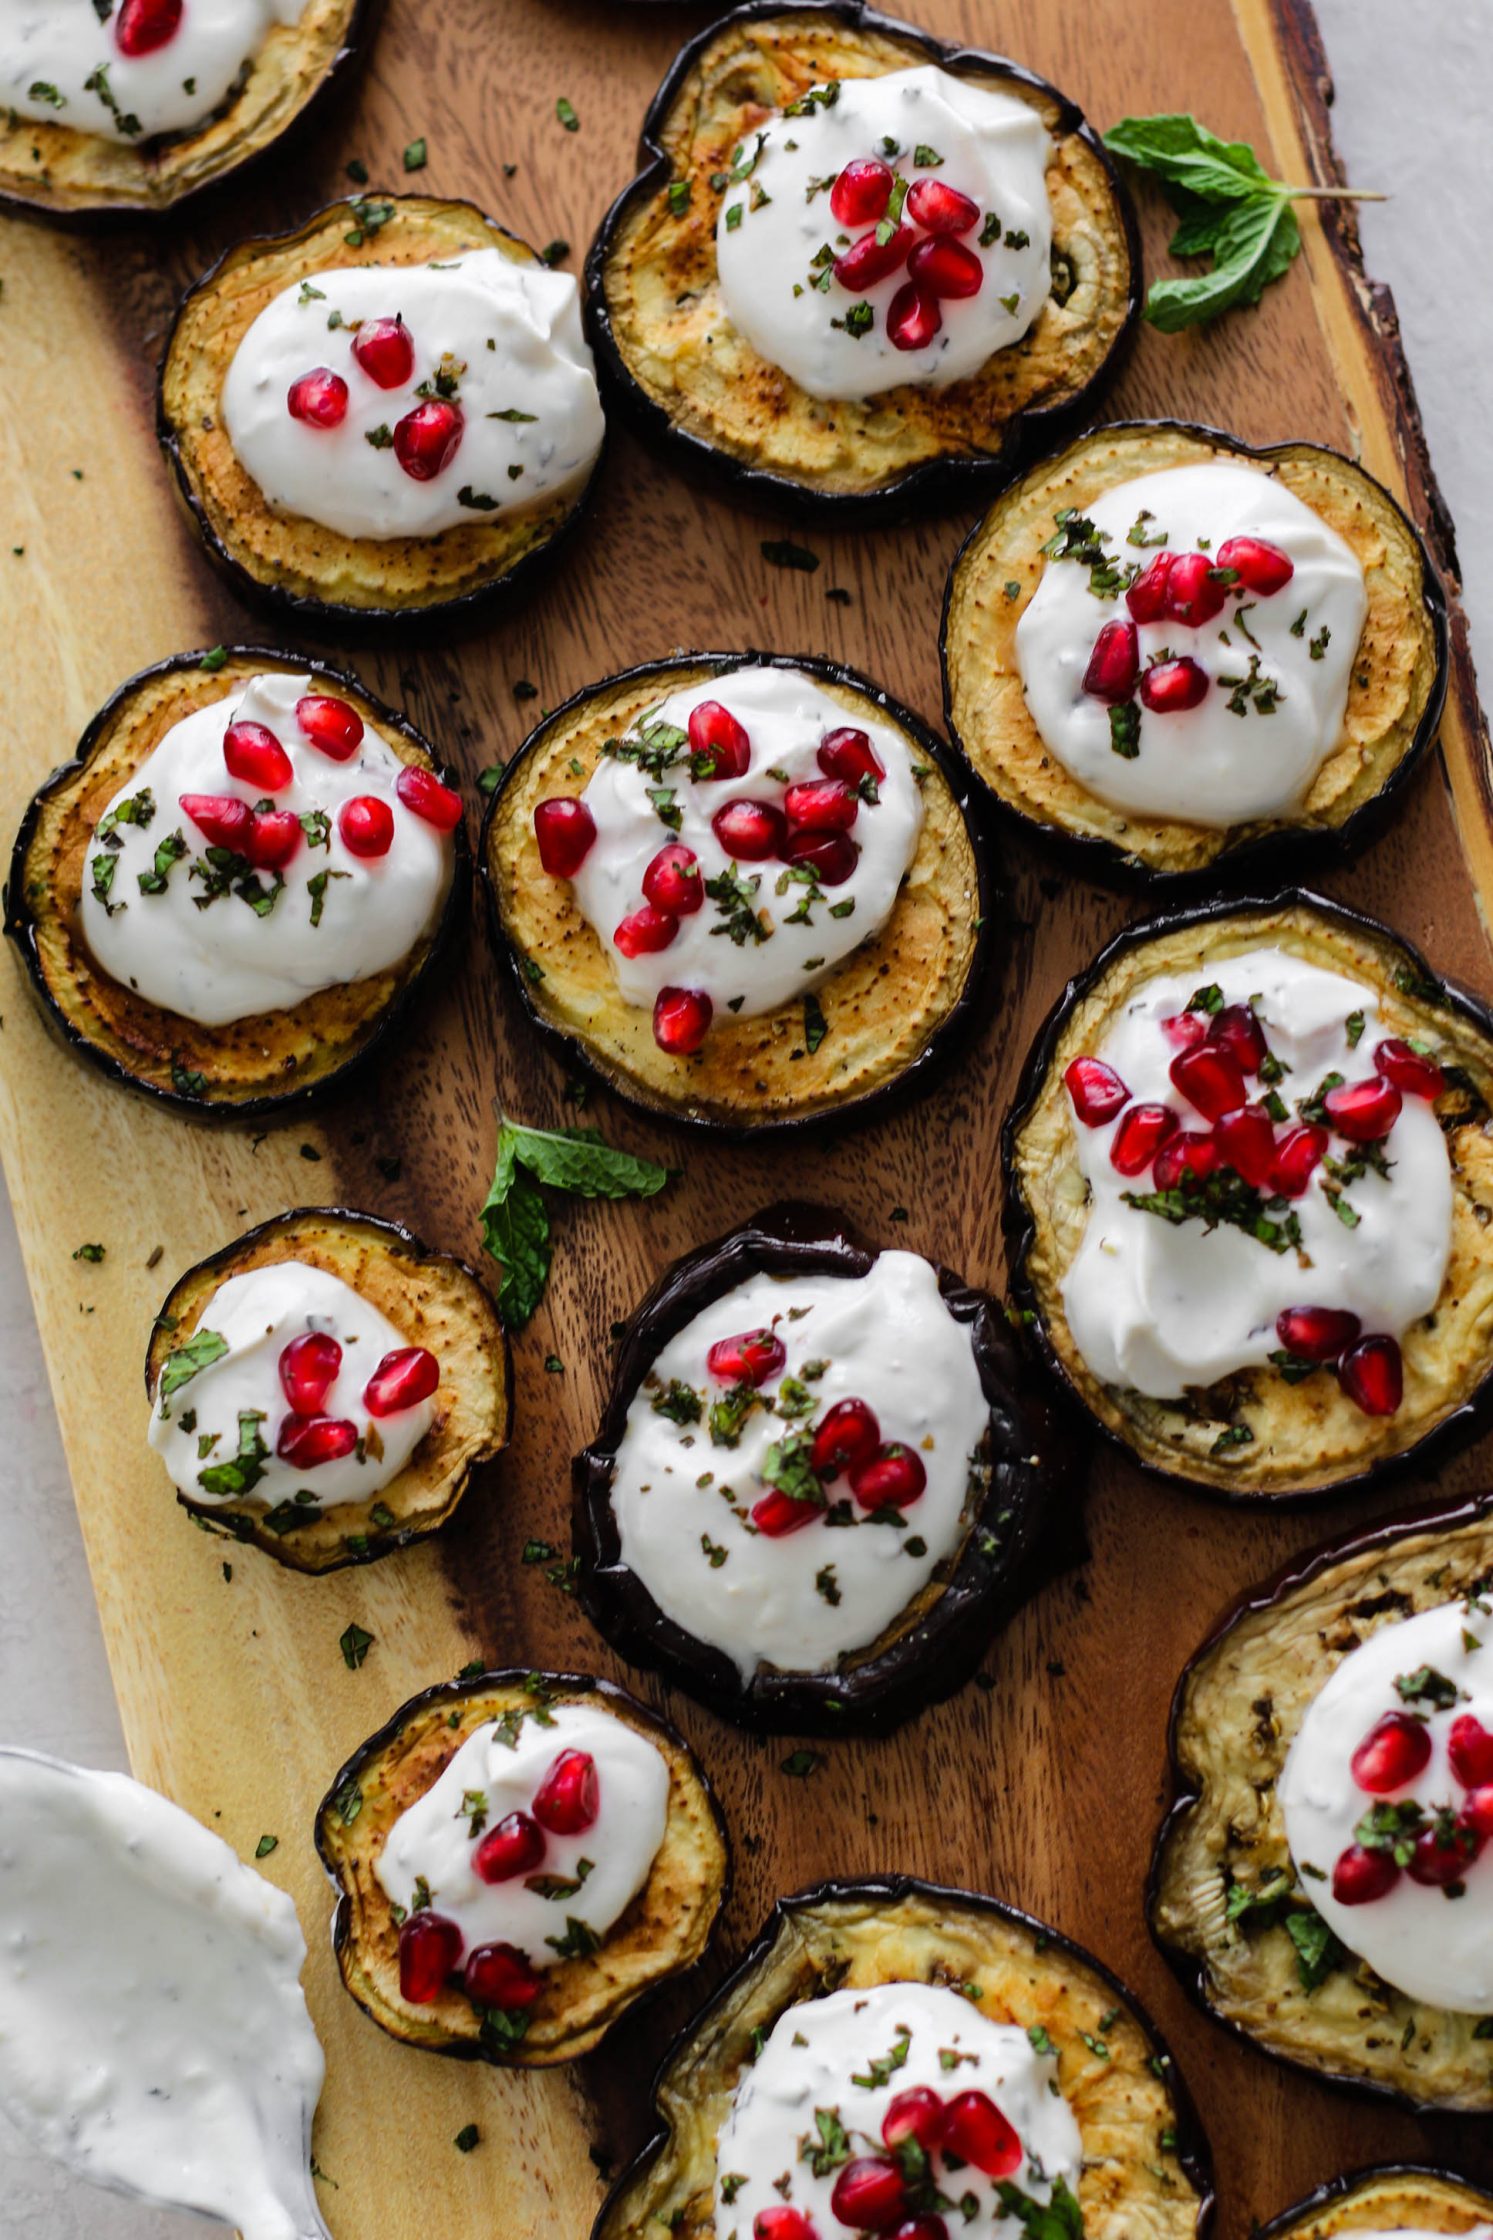 Eggplant Rounds topped with Herbed Yogurt Sauce & Pomegranate by Flora & Vino